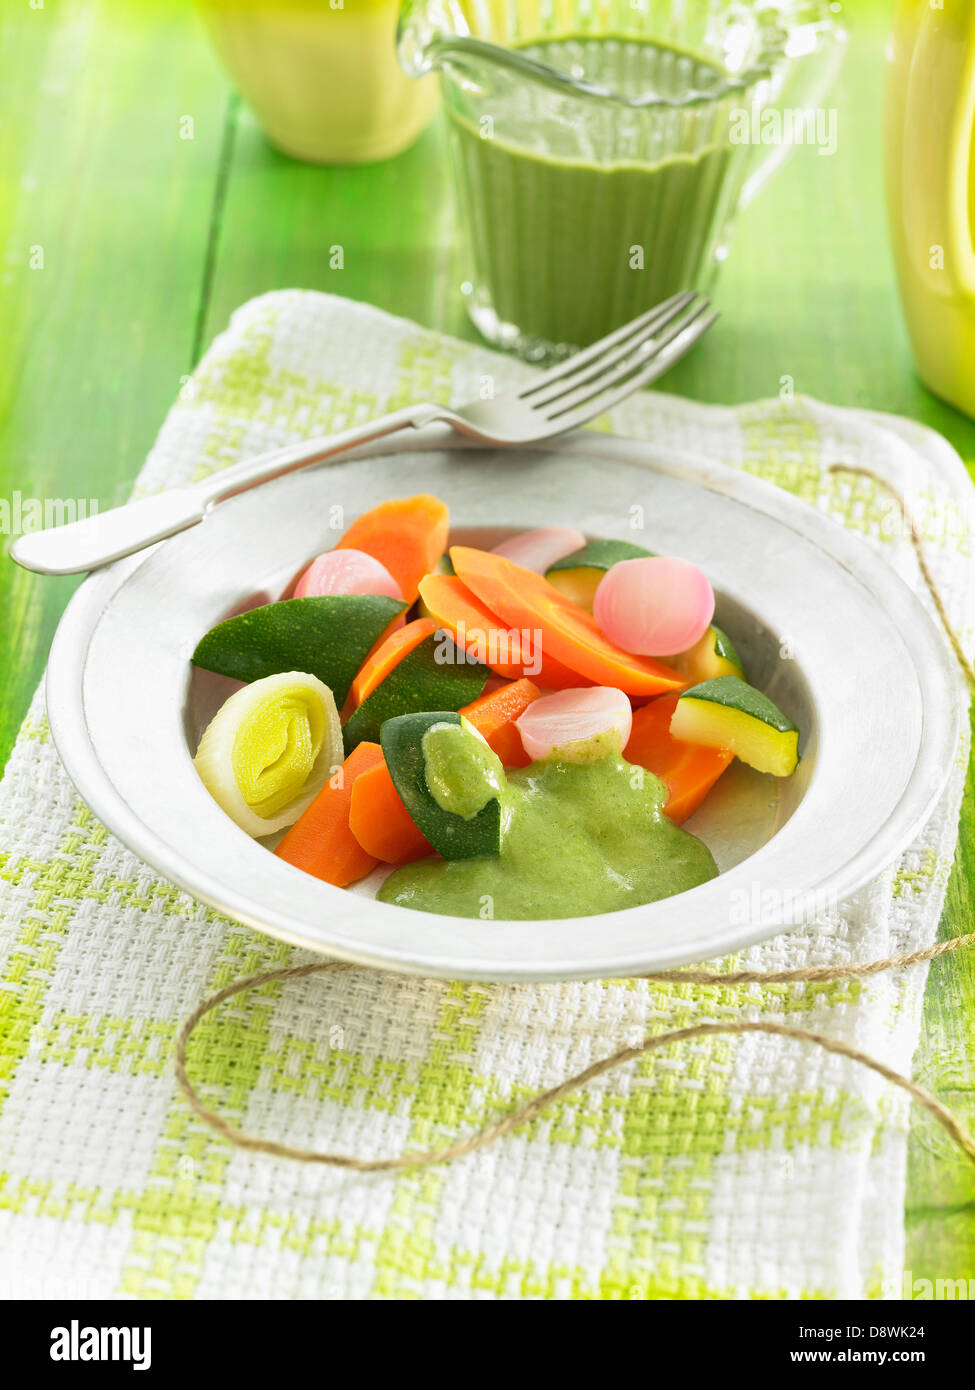 Steamed vegetables with green lentil and coconut milk sauce Stock Photo